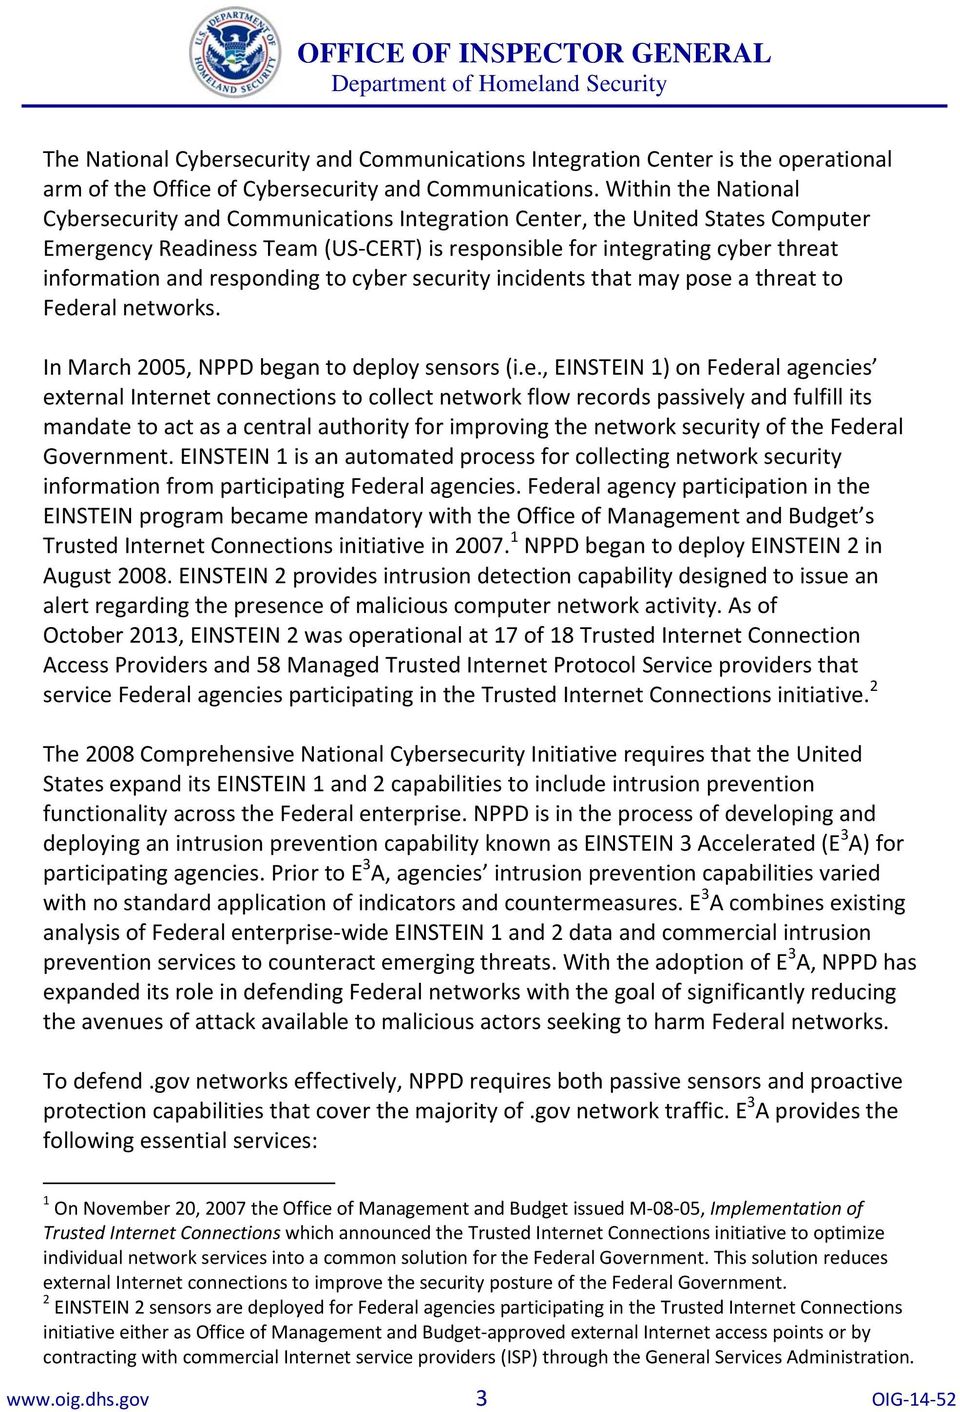 responding to cyber security incidents that may pose a threat to Federal networks. In March 2005, NPPD began to deploy sensors (i.e., EINSTEIN 1) on Federal agencies external Internet connections to